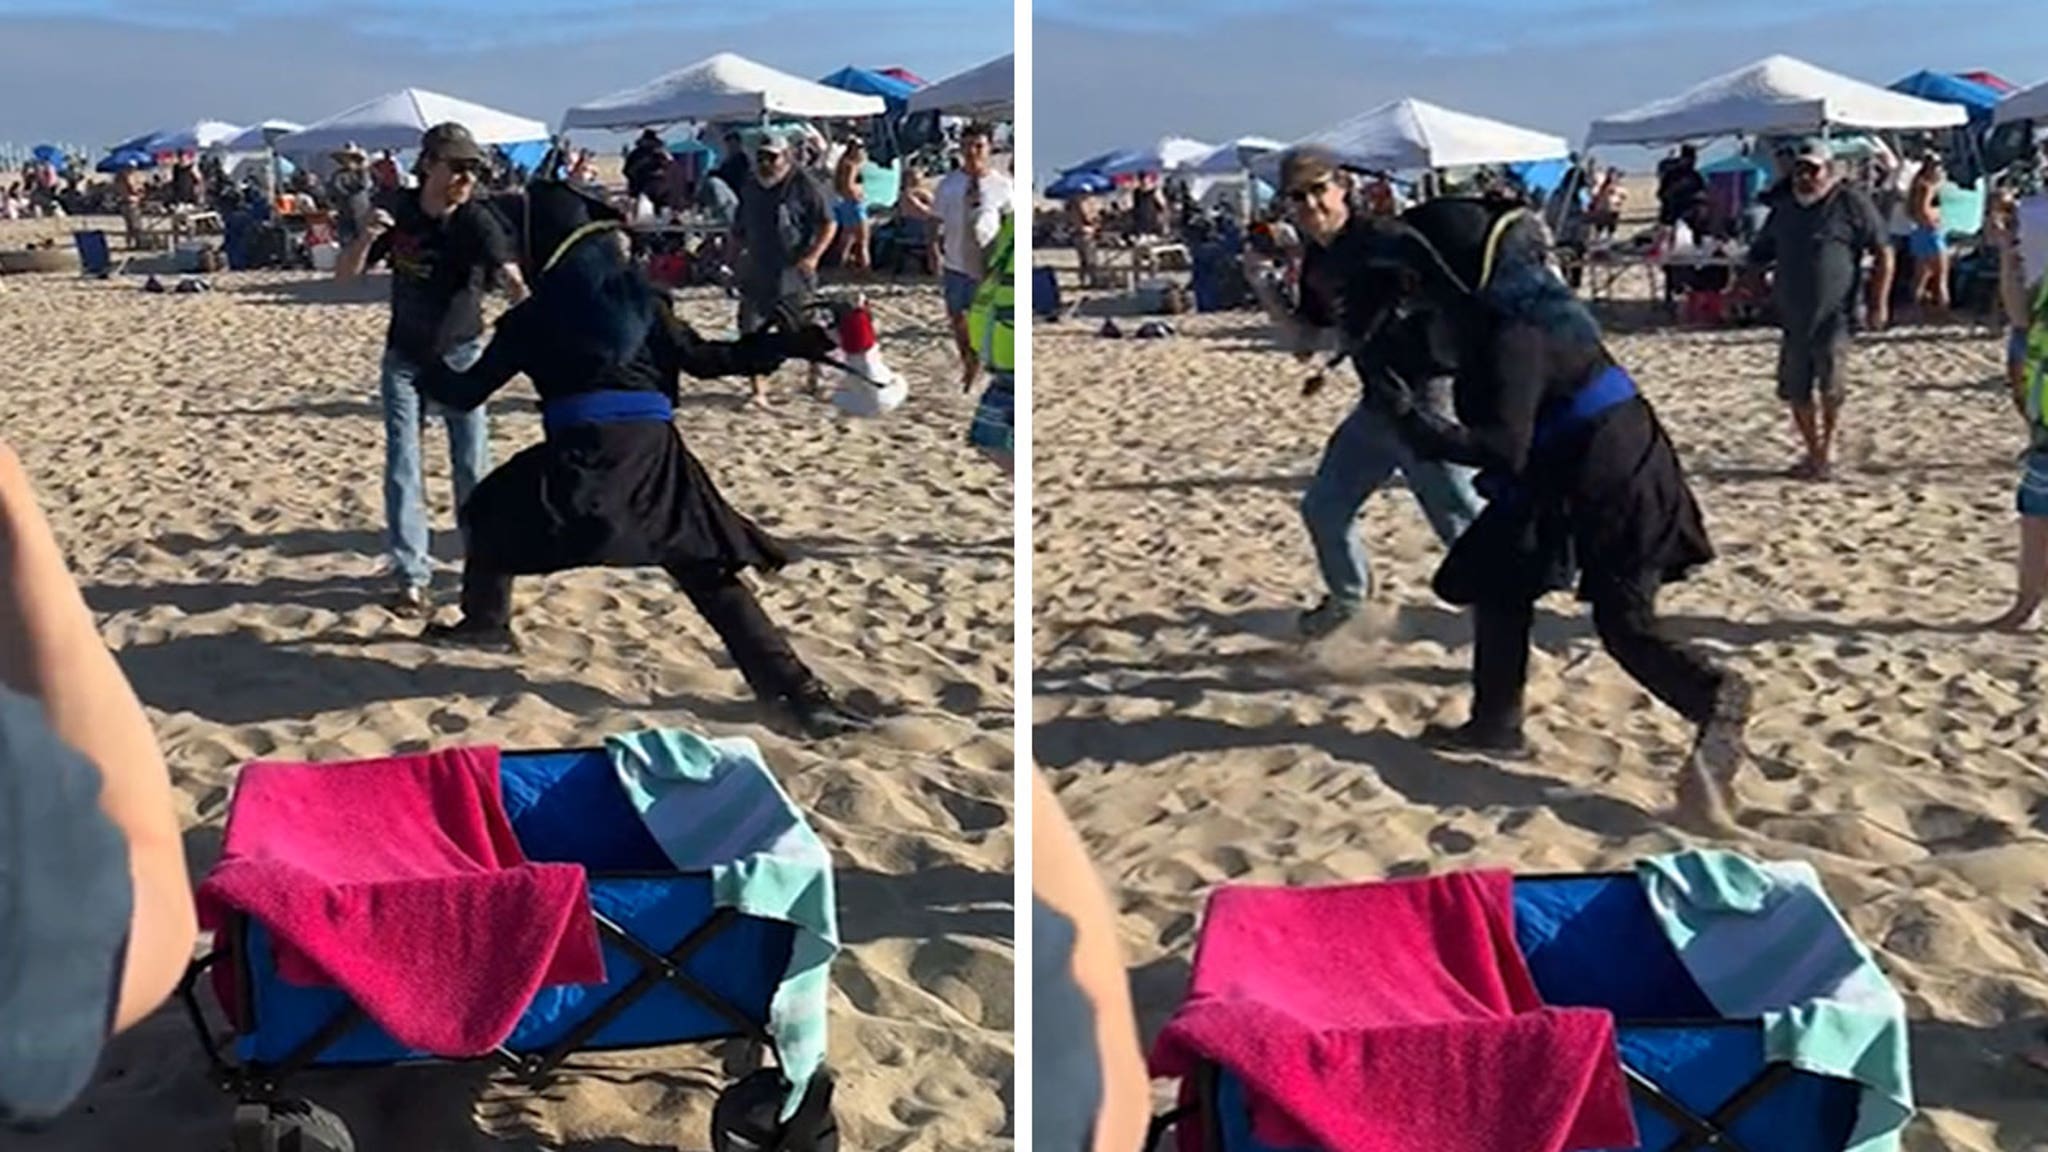 Man Attacked By Furry At Huntington Beach Meetup, Wild Video Shows image